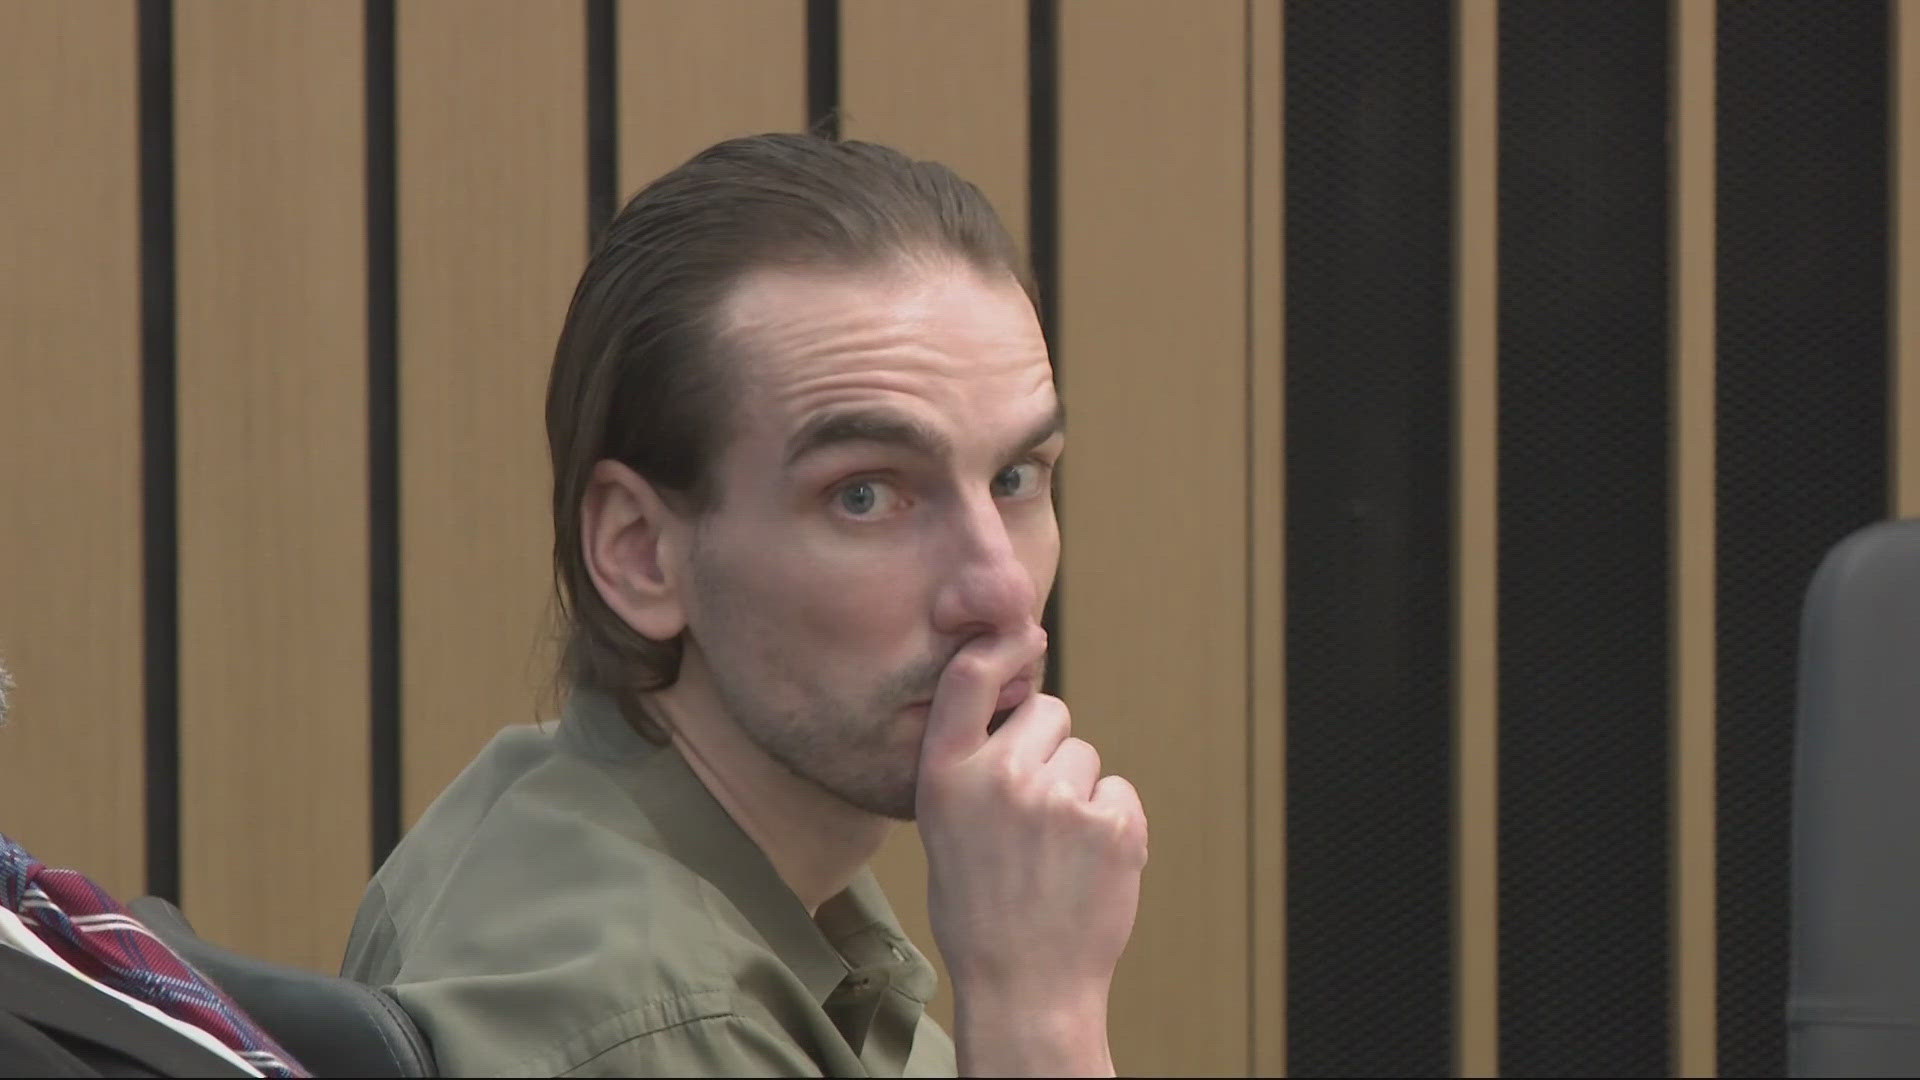 Jared Walter was found guilty of over 30 counts of invasion of privacy. He was arrested in 2020 for the same offense.